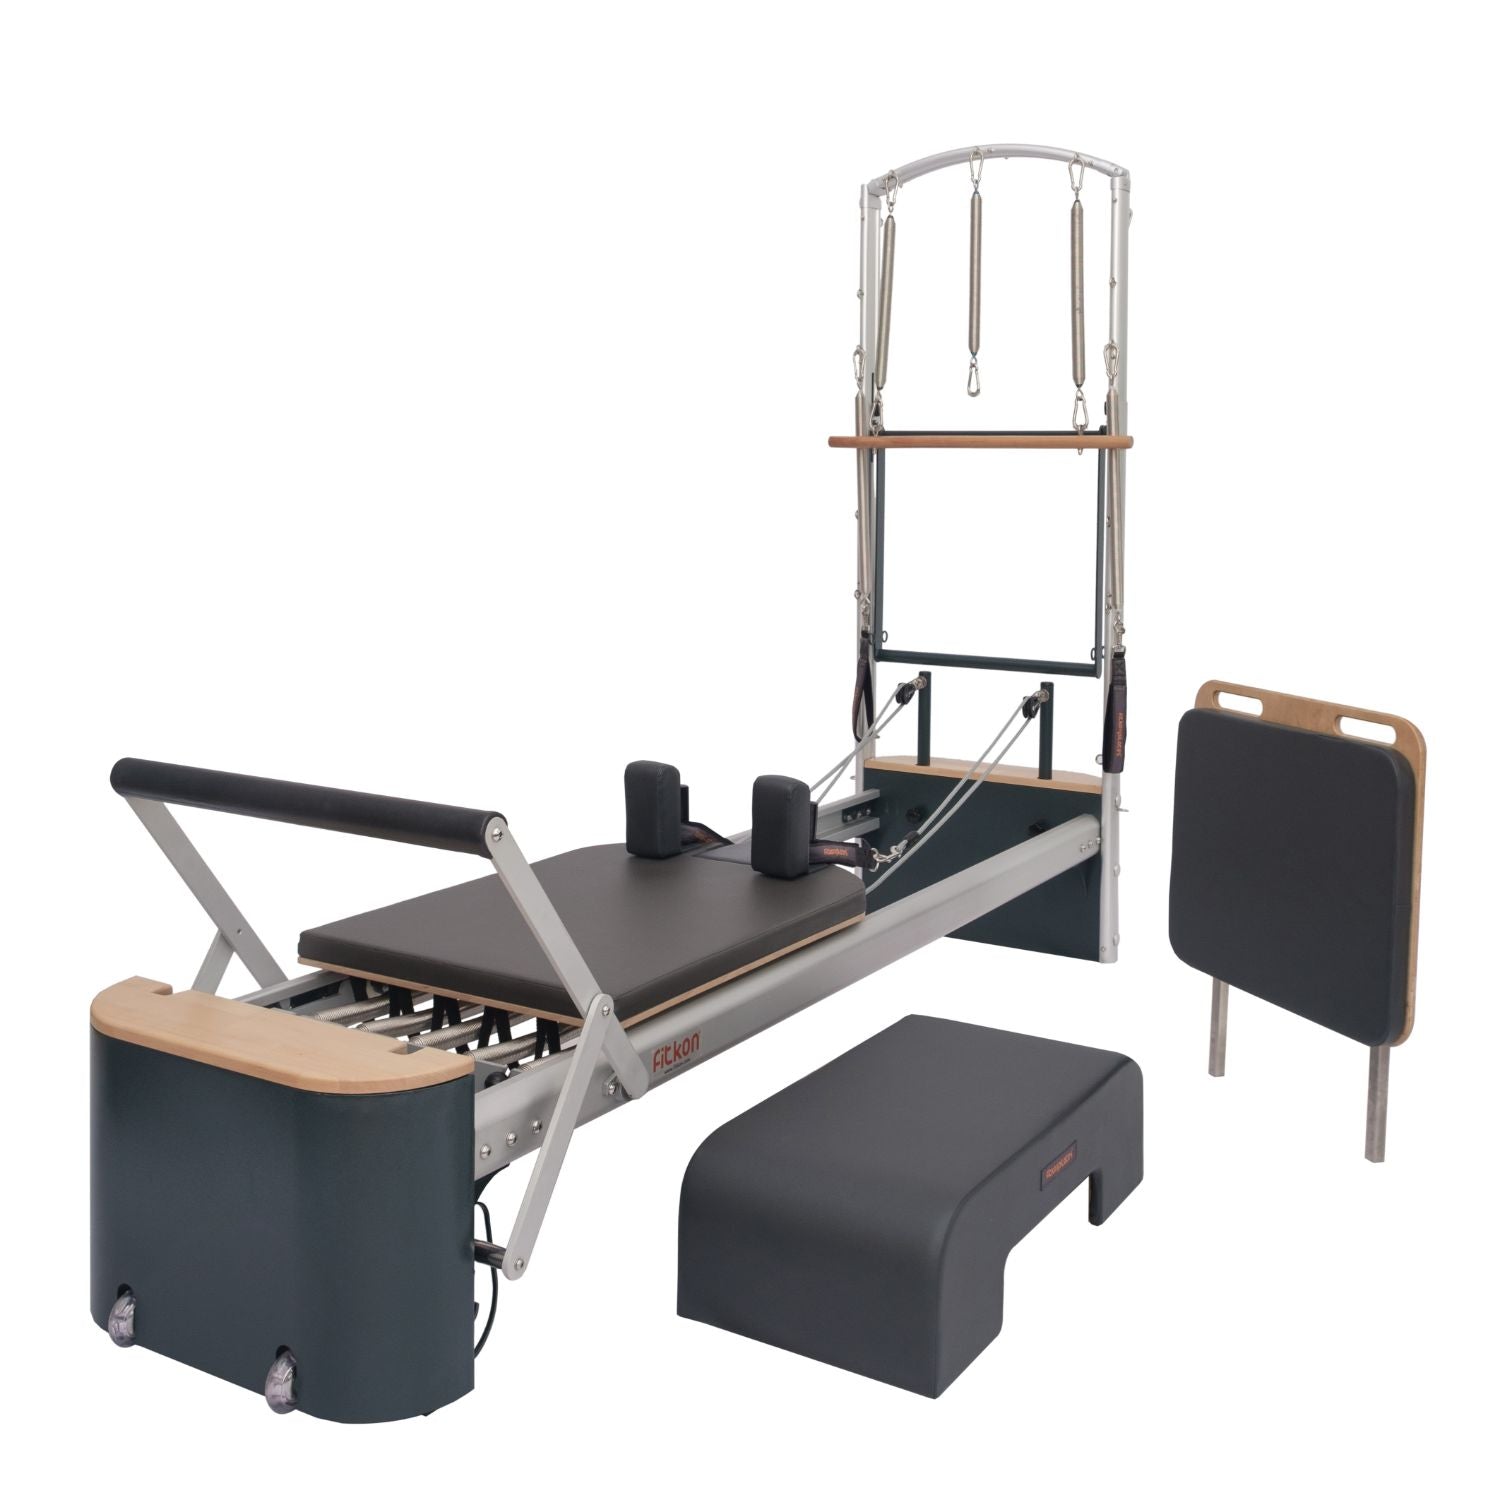 Pilates Allegro Reformer + Tower w/ Box & Jumpboard. for Sale in